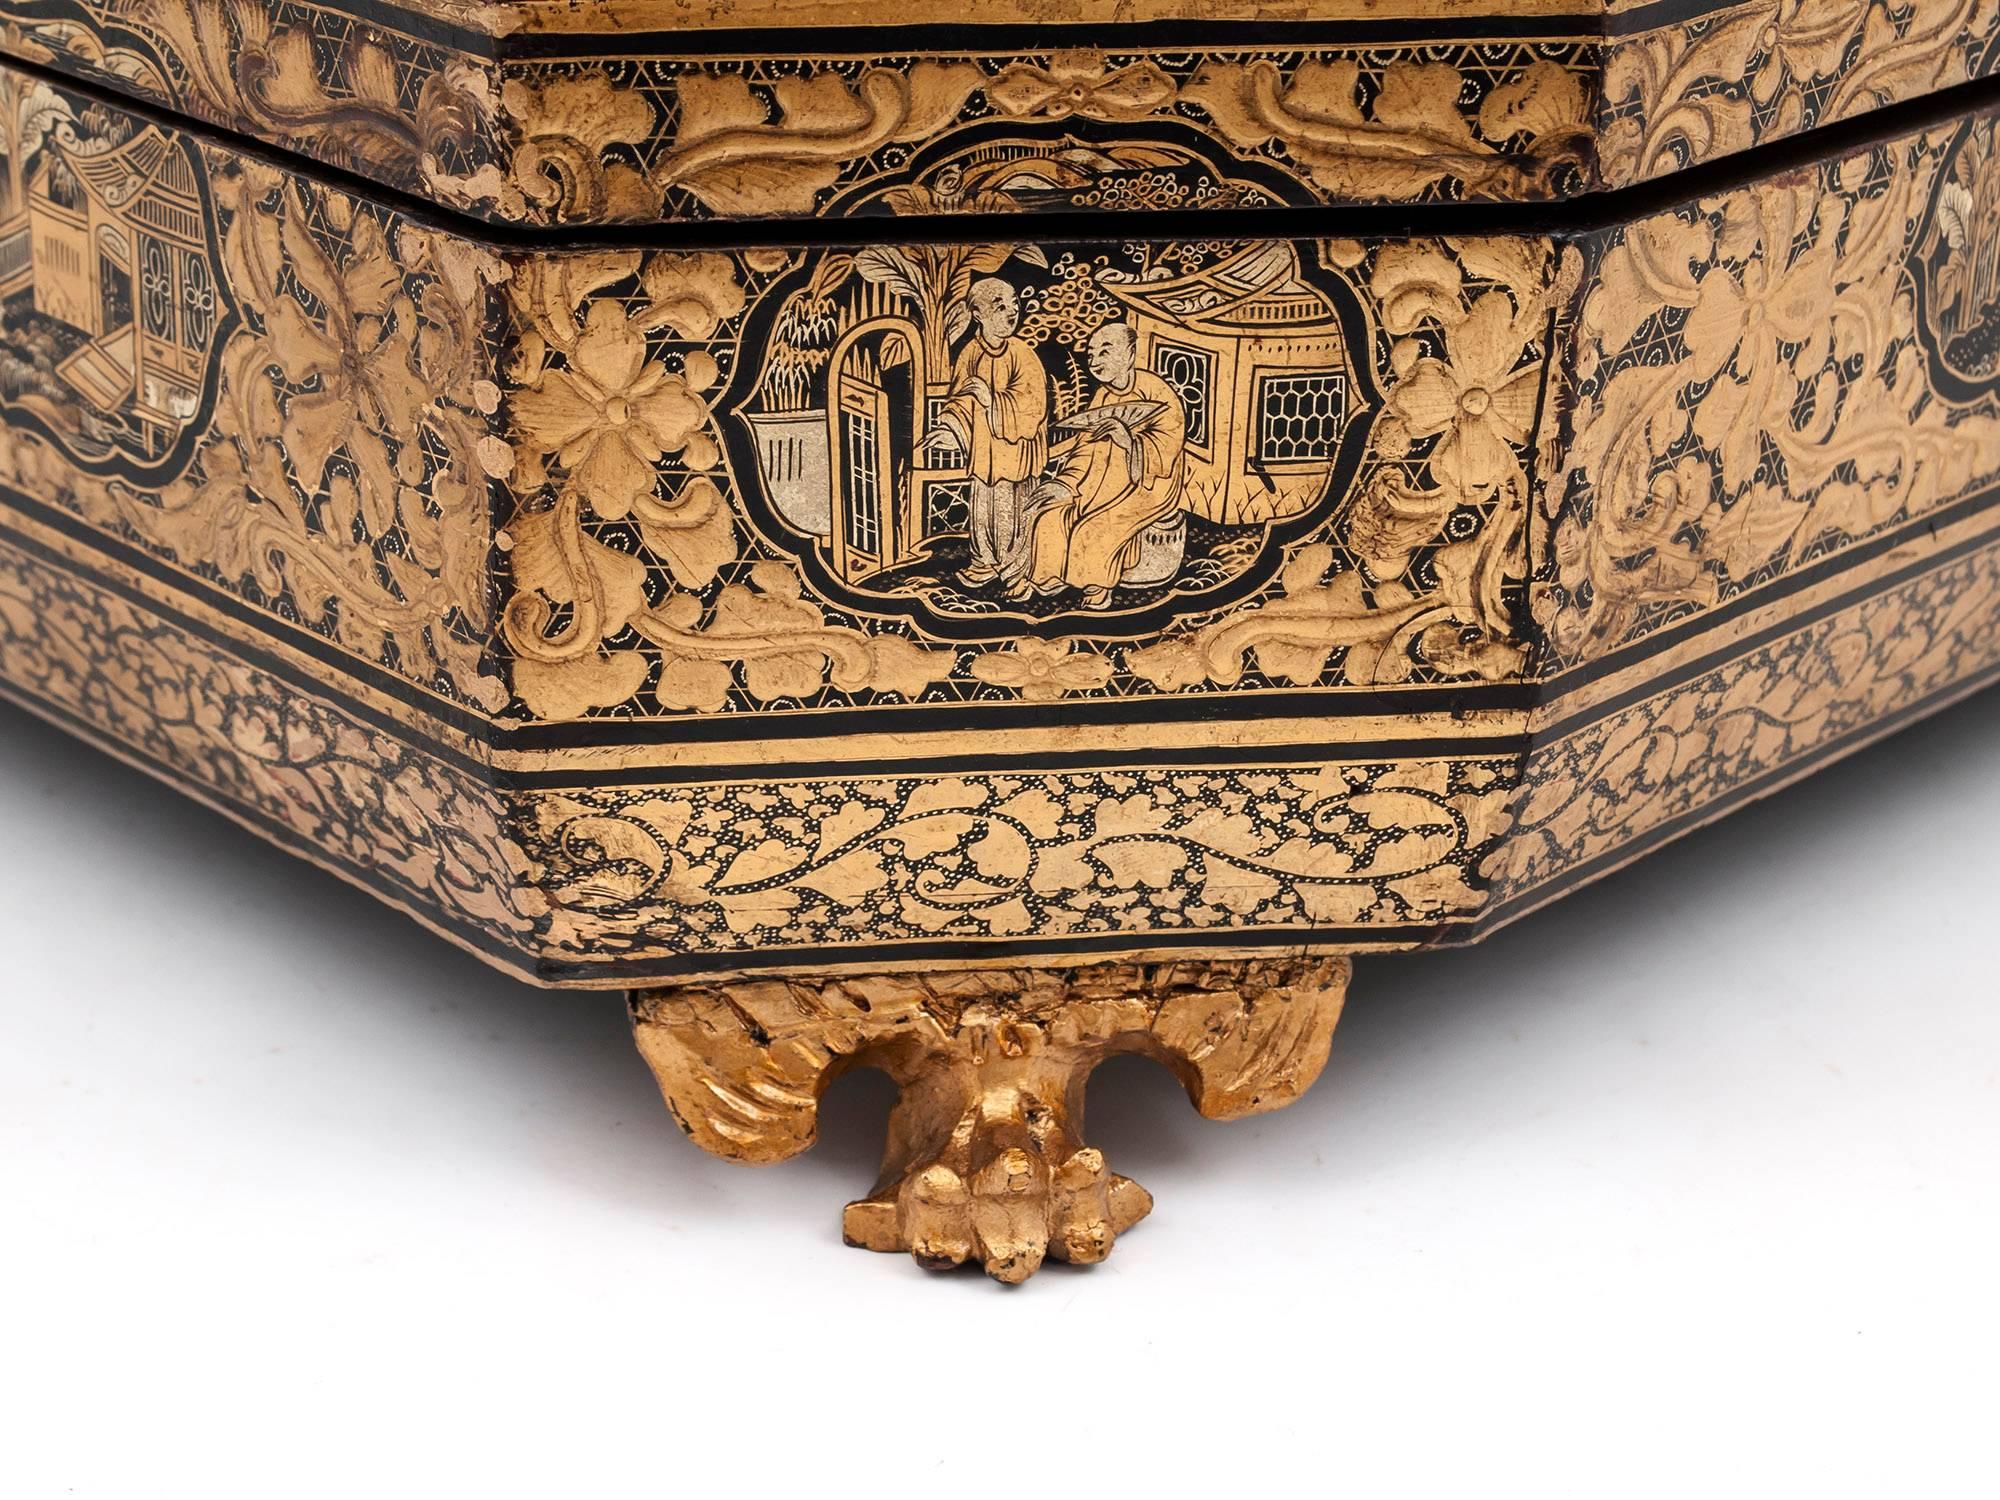 Chinese Export Qing Dynasty Antique Lacquer Games Box, 19th Century 4